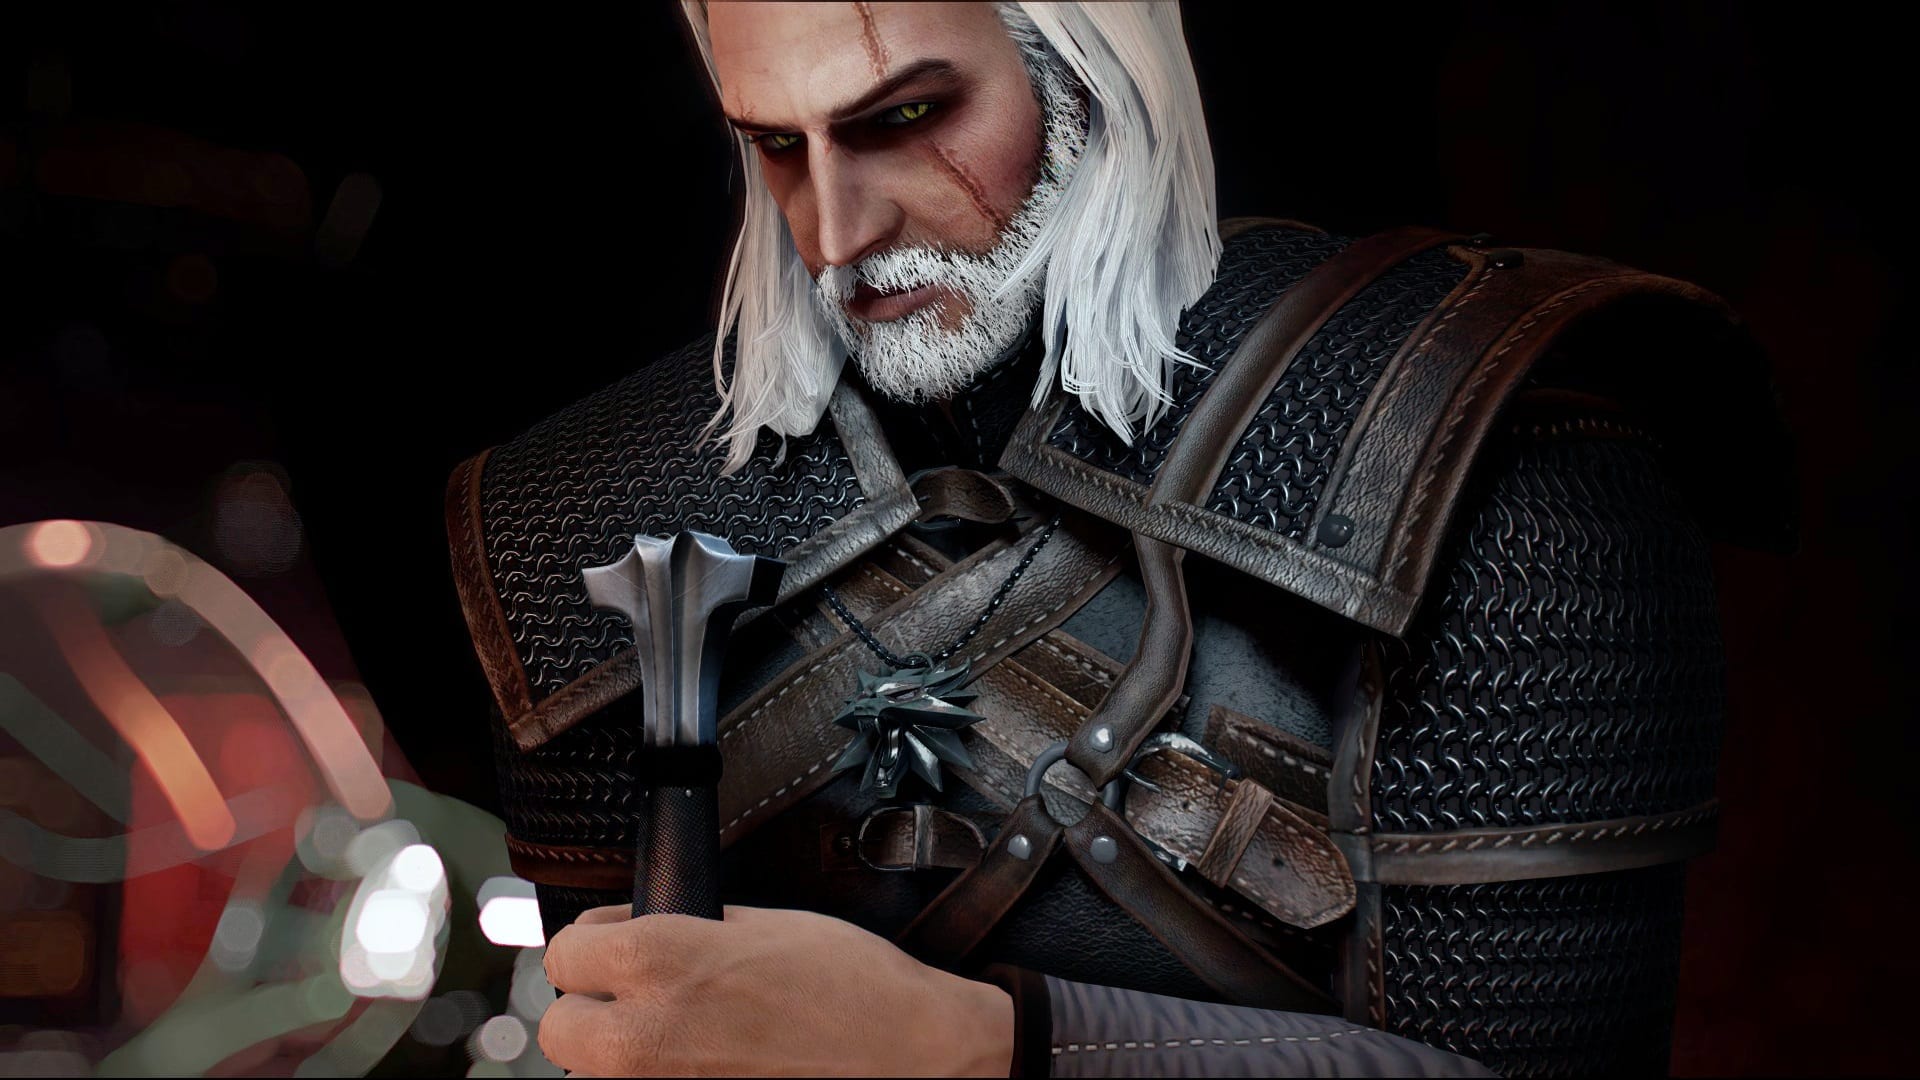 Witcher 3 Characters, Geralt and Ciri in Fallout 4